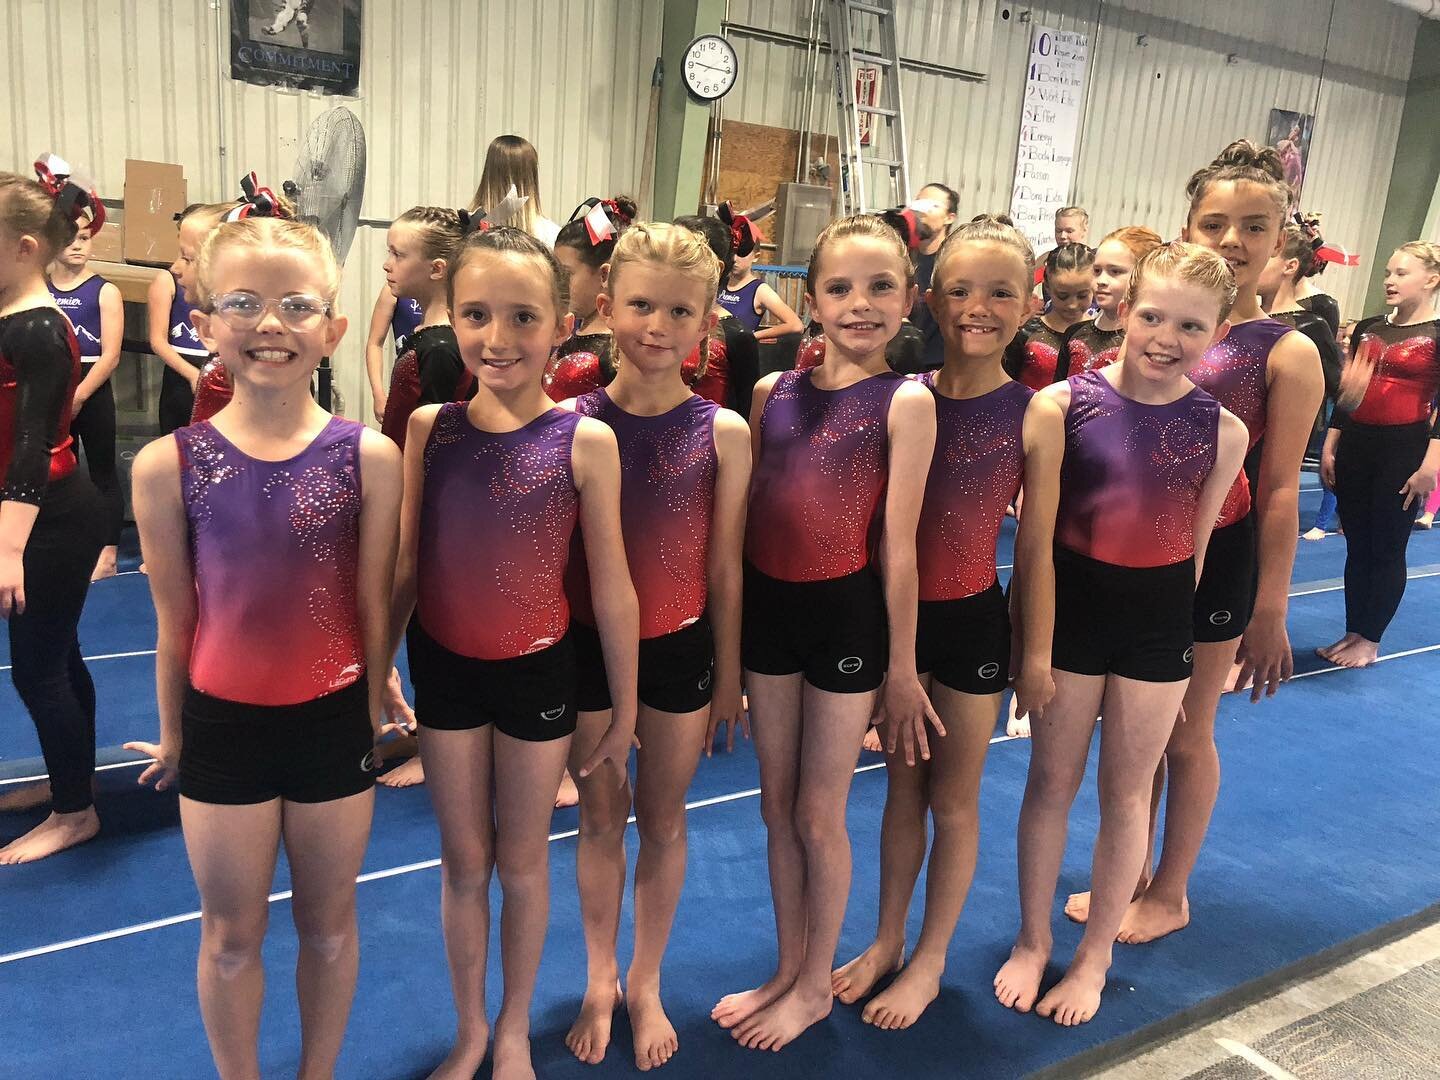 A bit of a late post&hellip; but so proud of these girls! Last week our Bronze team competed in their 3rd meet of the season and did awesome!! One more meet to go until STATES!! WOOT WOOT!!